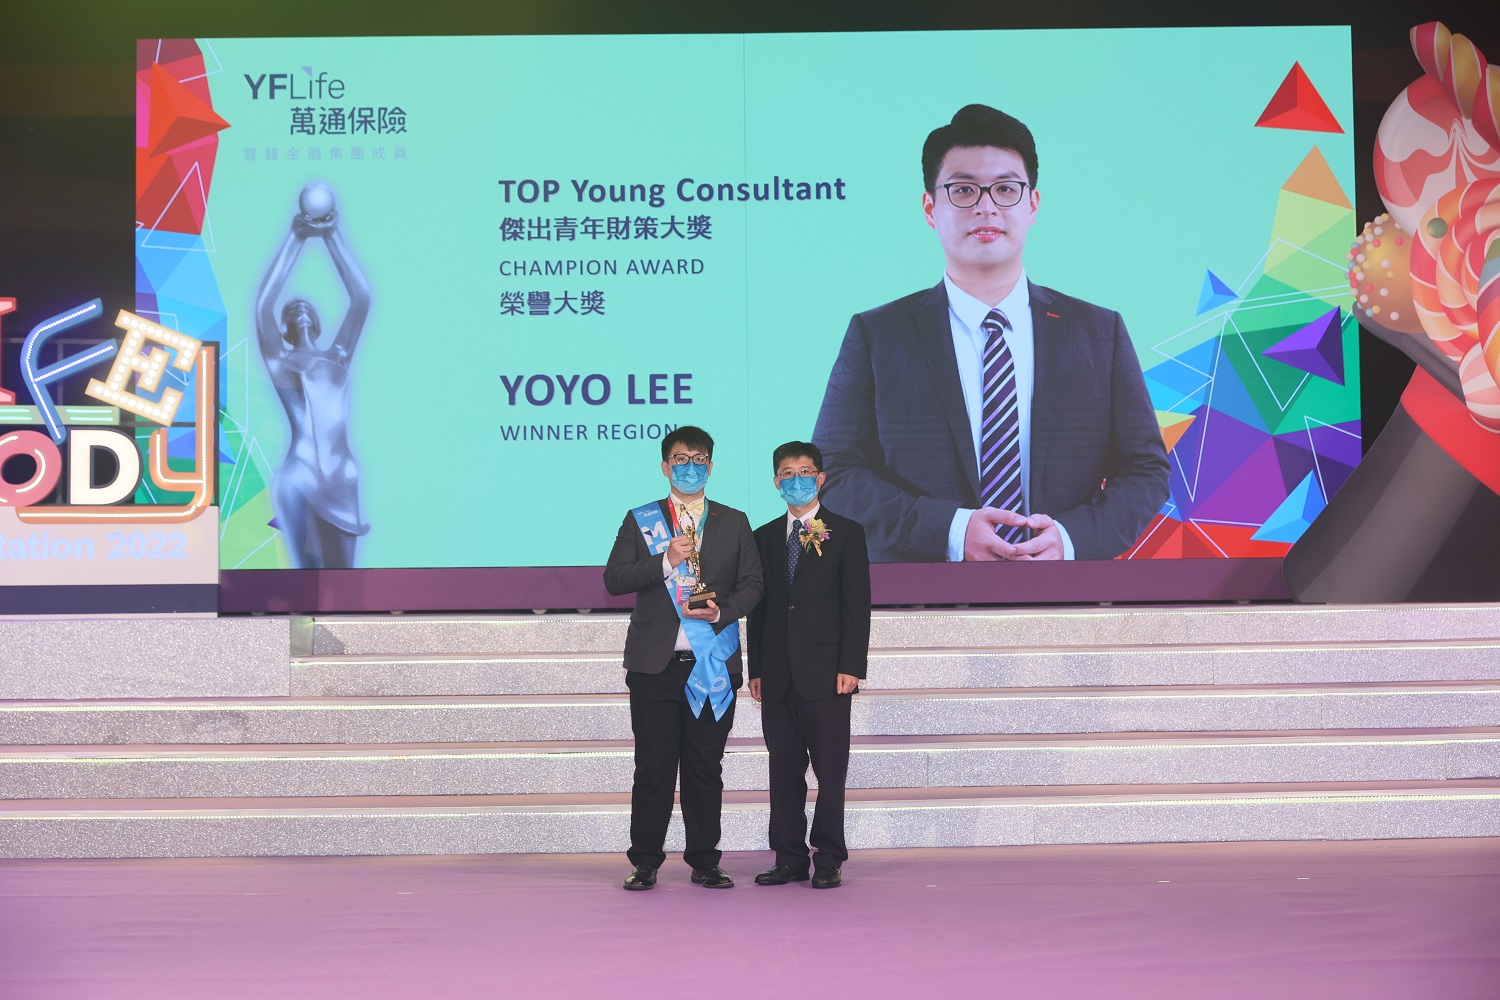 Mr. Yoyo Lee, Champion Award winner of Top Young Consultant. 